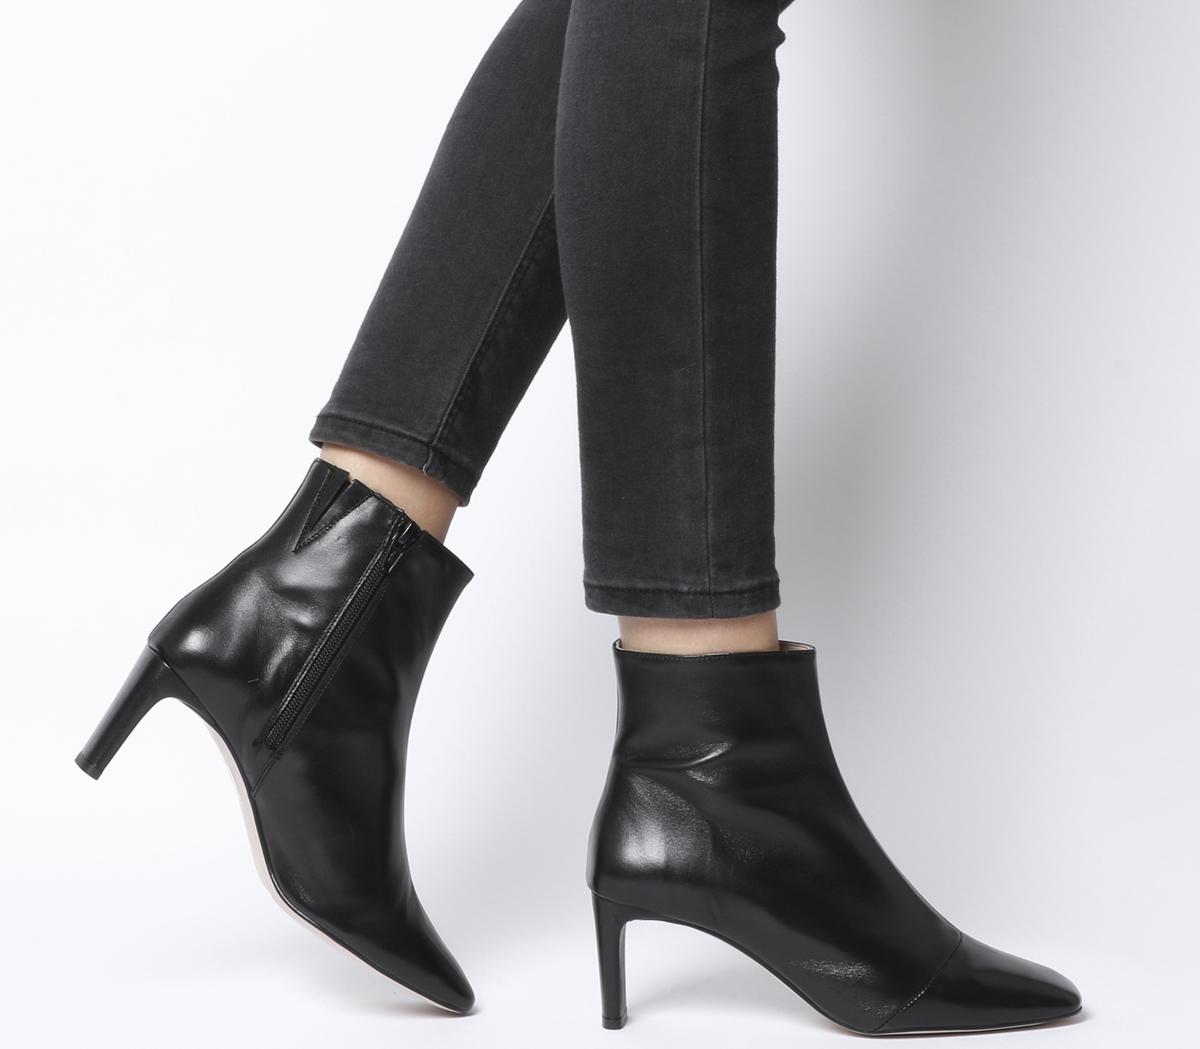 square toe low heel boots